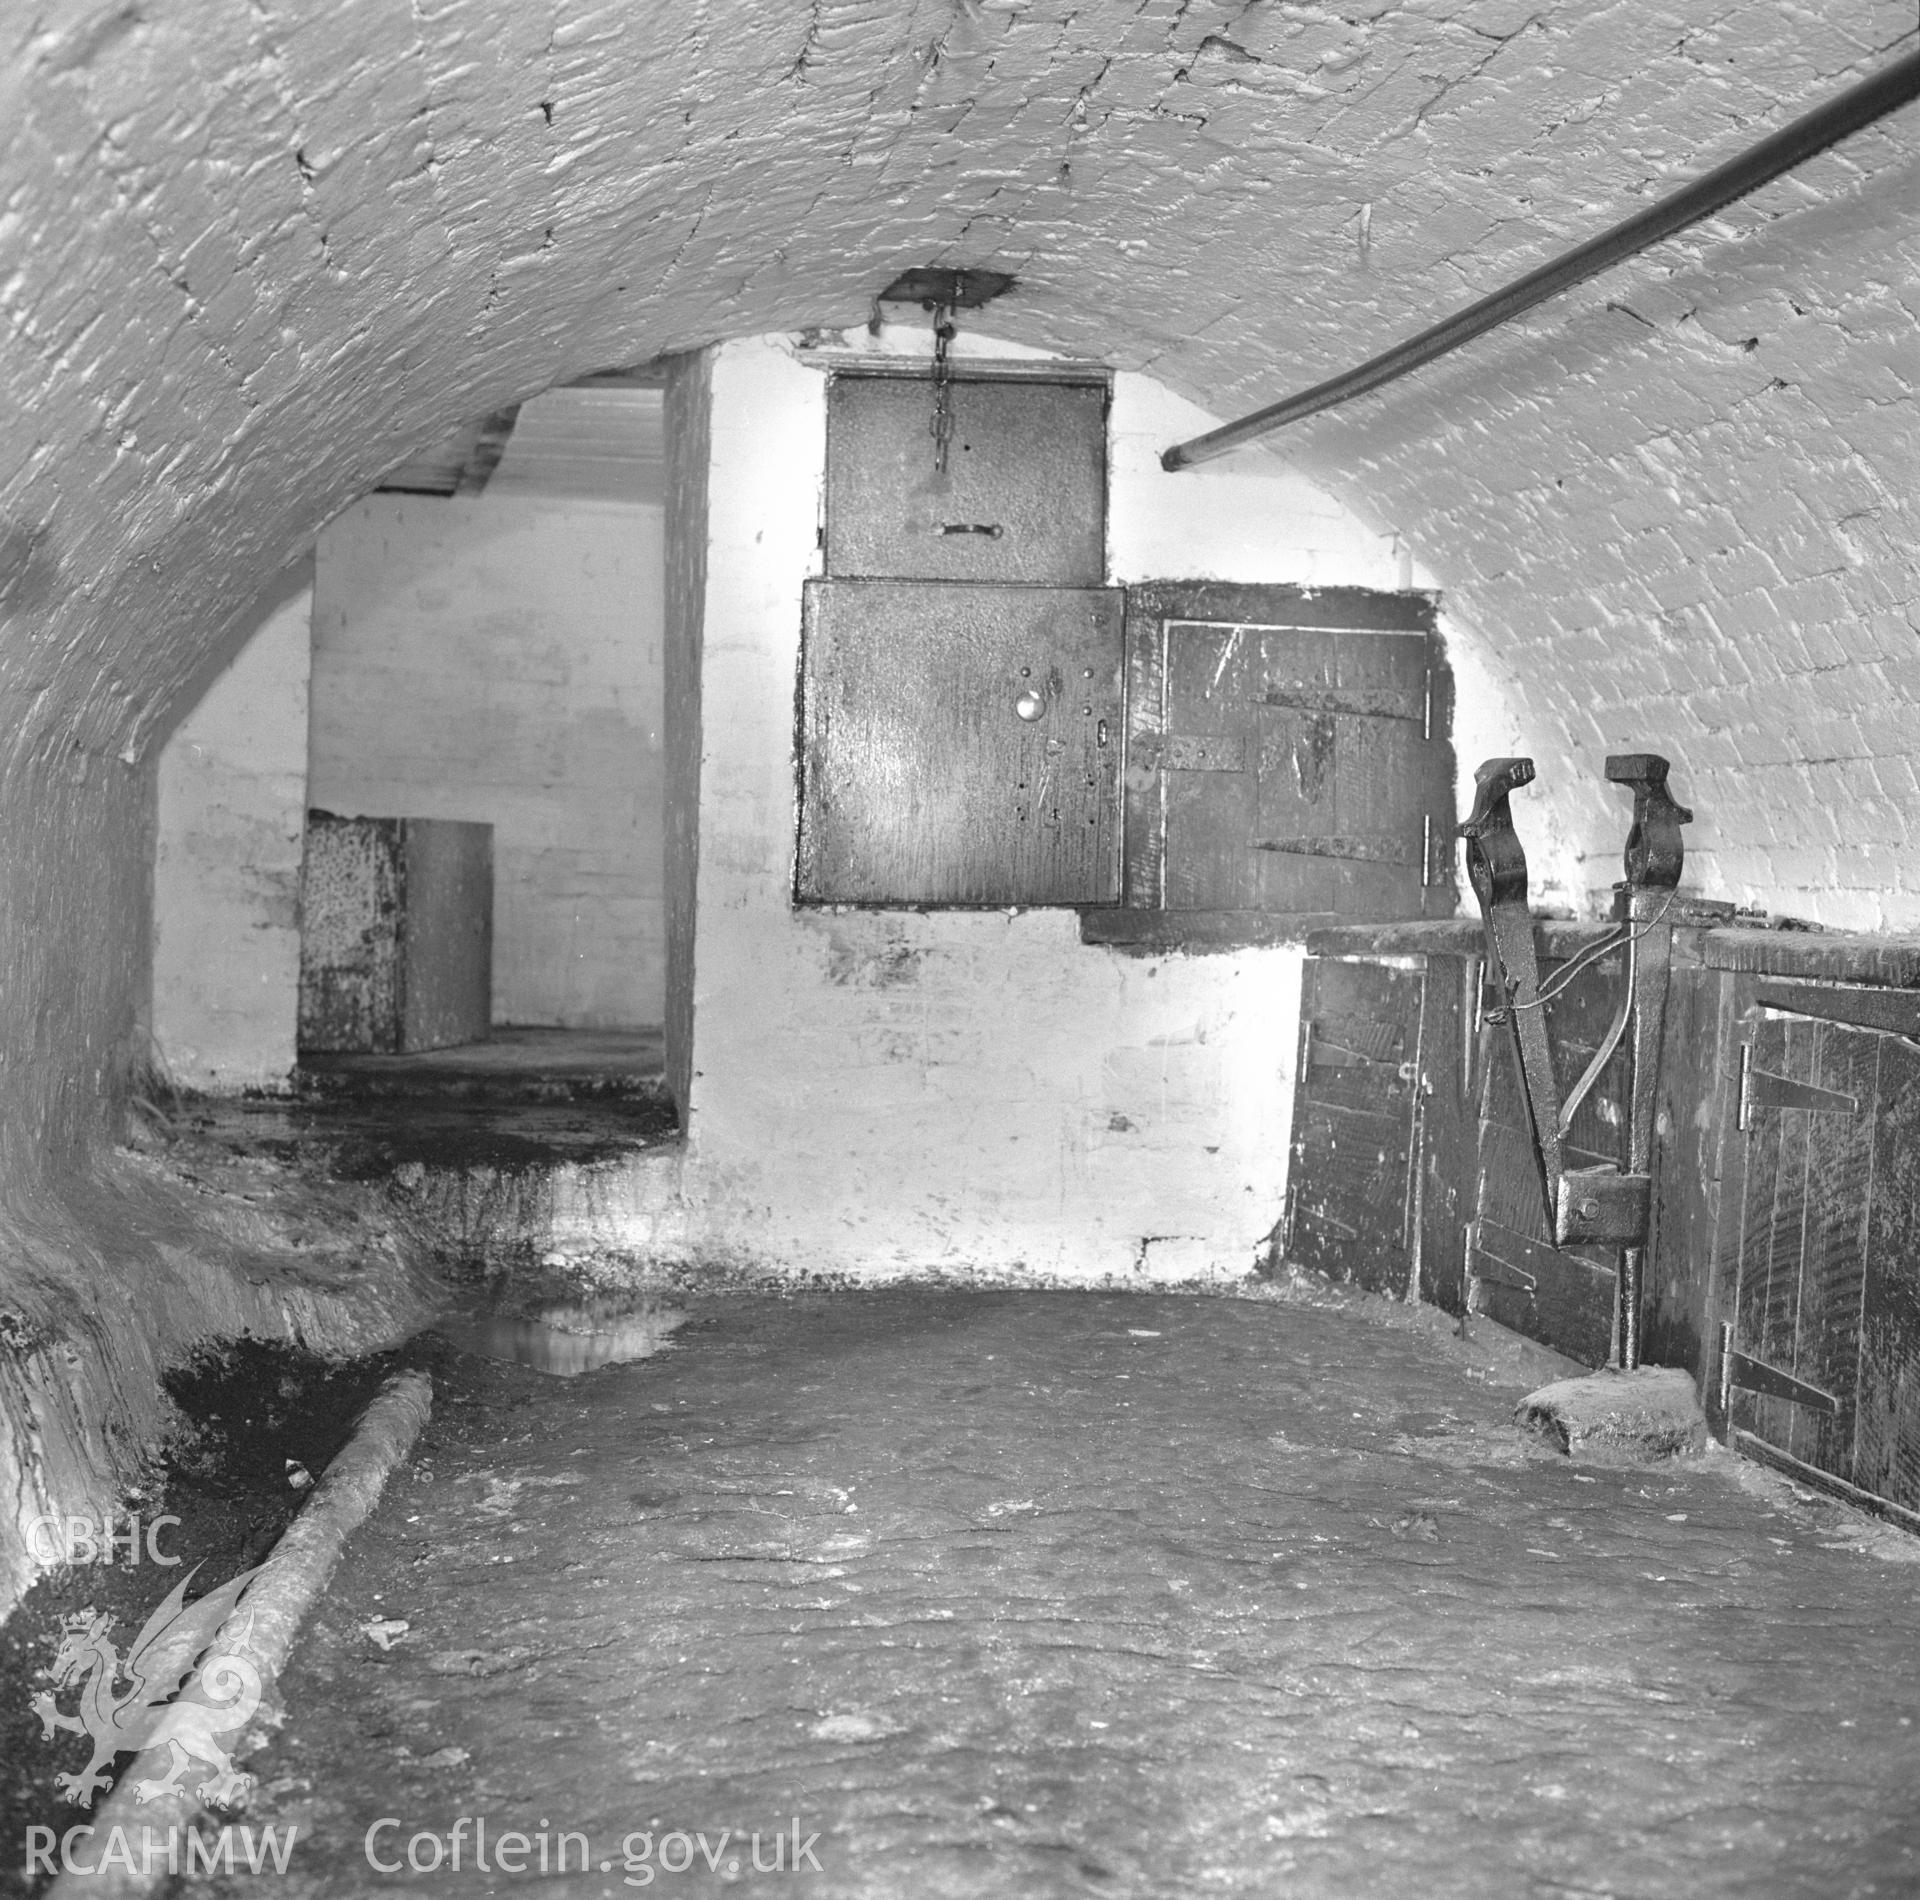 Digital copy of an acetate negative showing underground workshop at Big Pit, from the John Cornwell Collection.